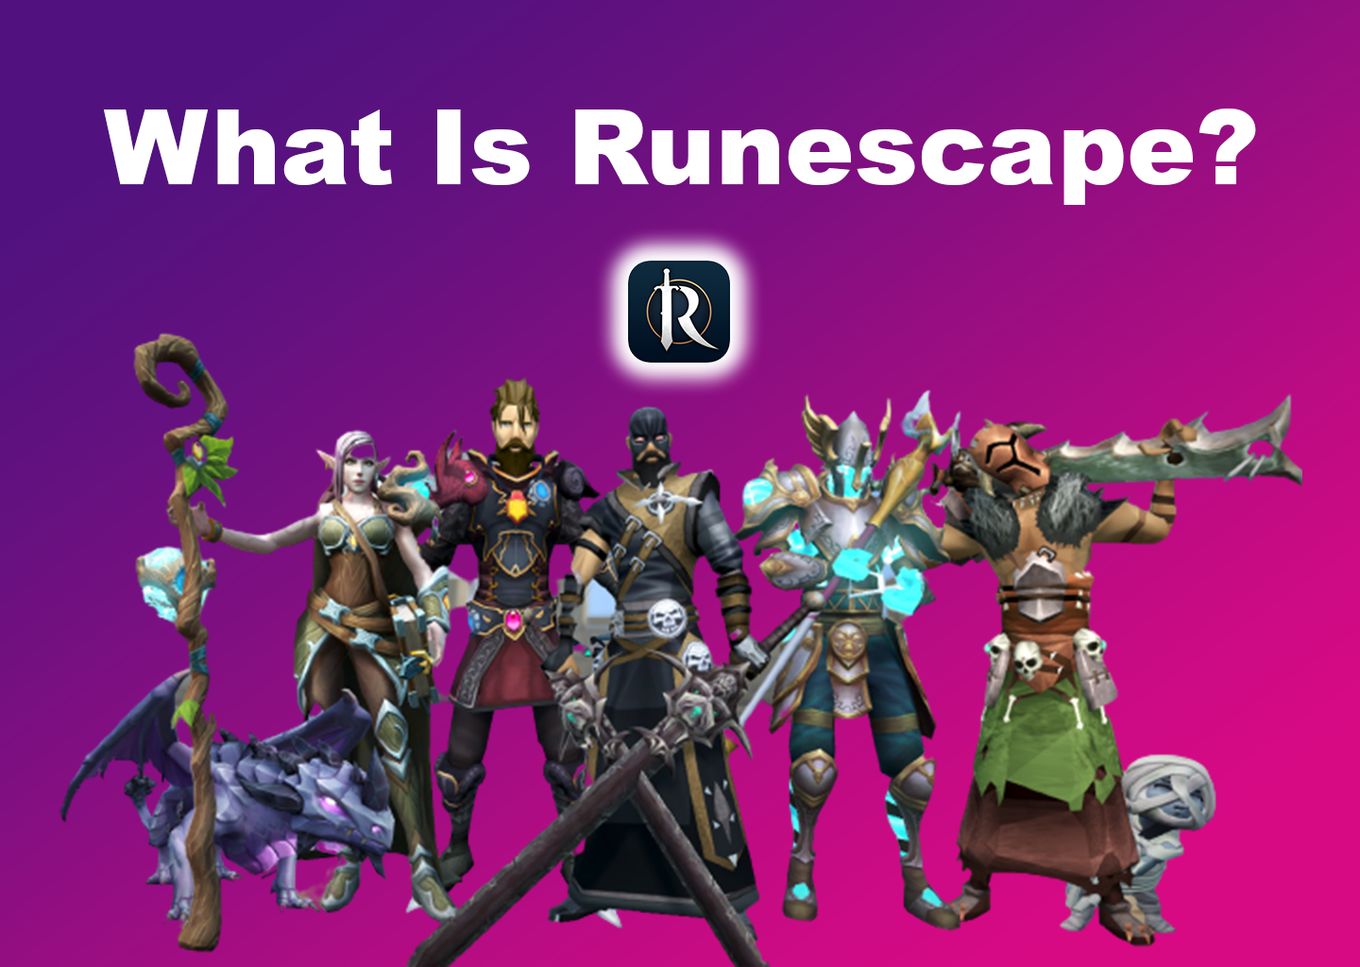 New School Runescape will be available for Android on October 30